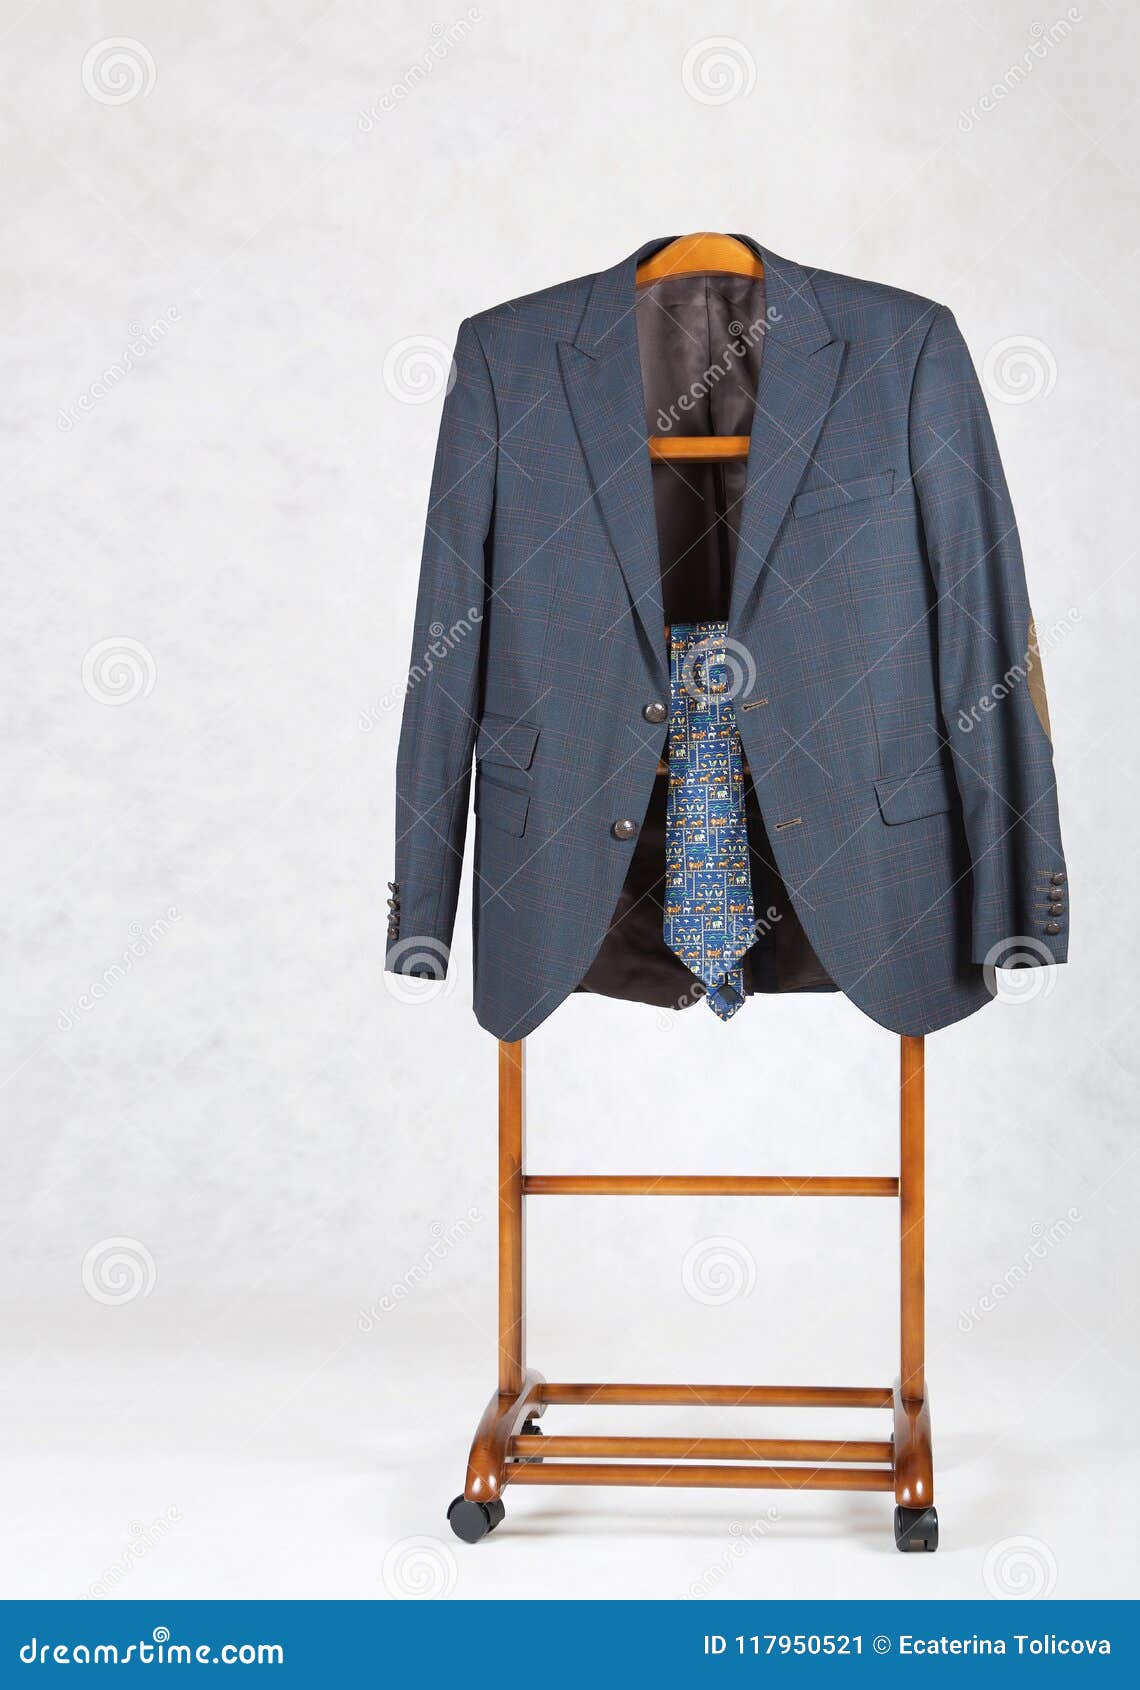 Male Classical Jacket and a Tie are on a Jacket Hanger Stand. Stock Image -  Image of arrangement, hanger: 117950521